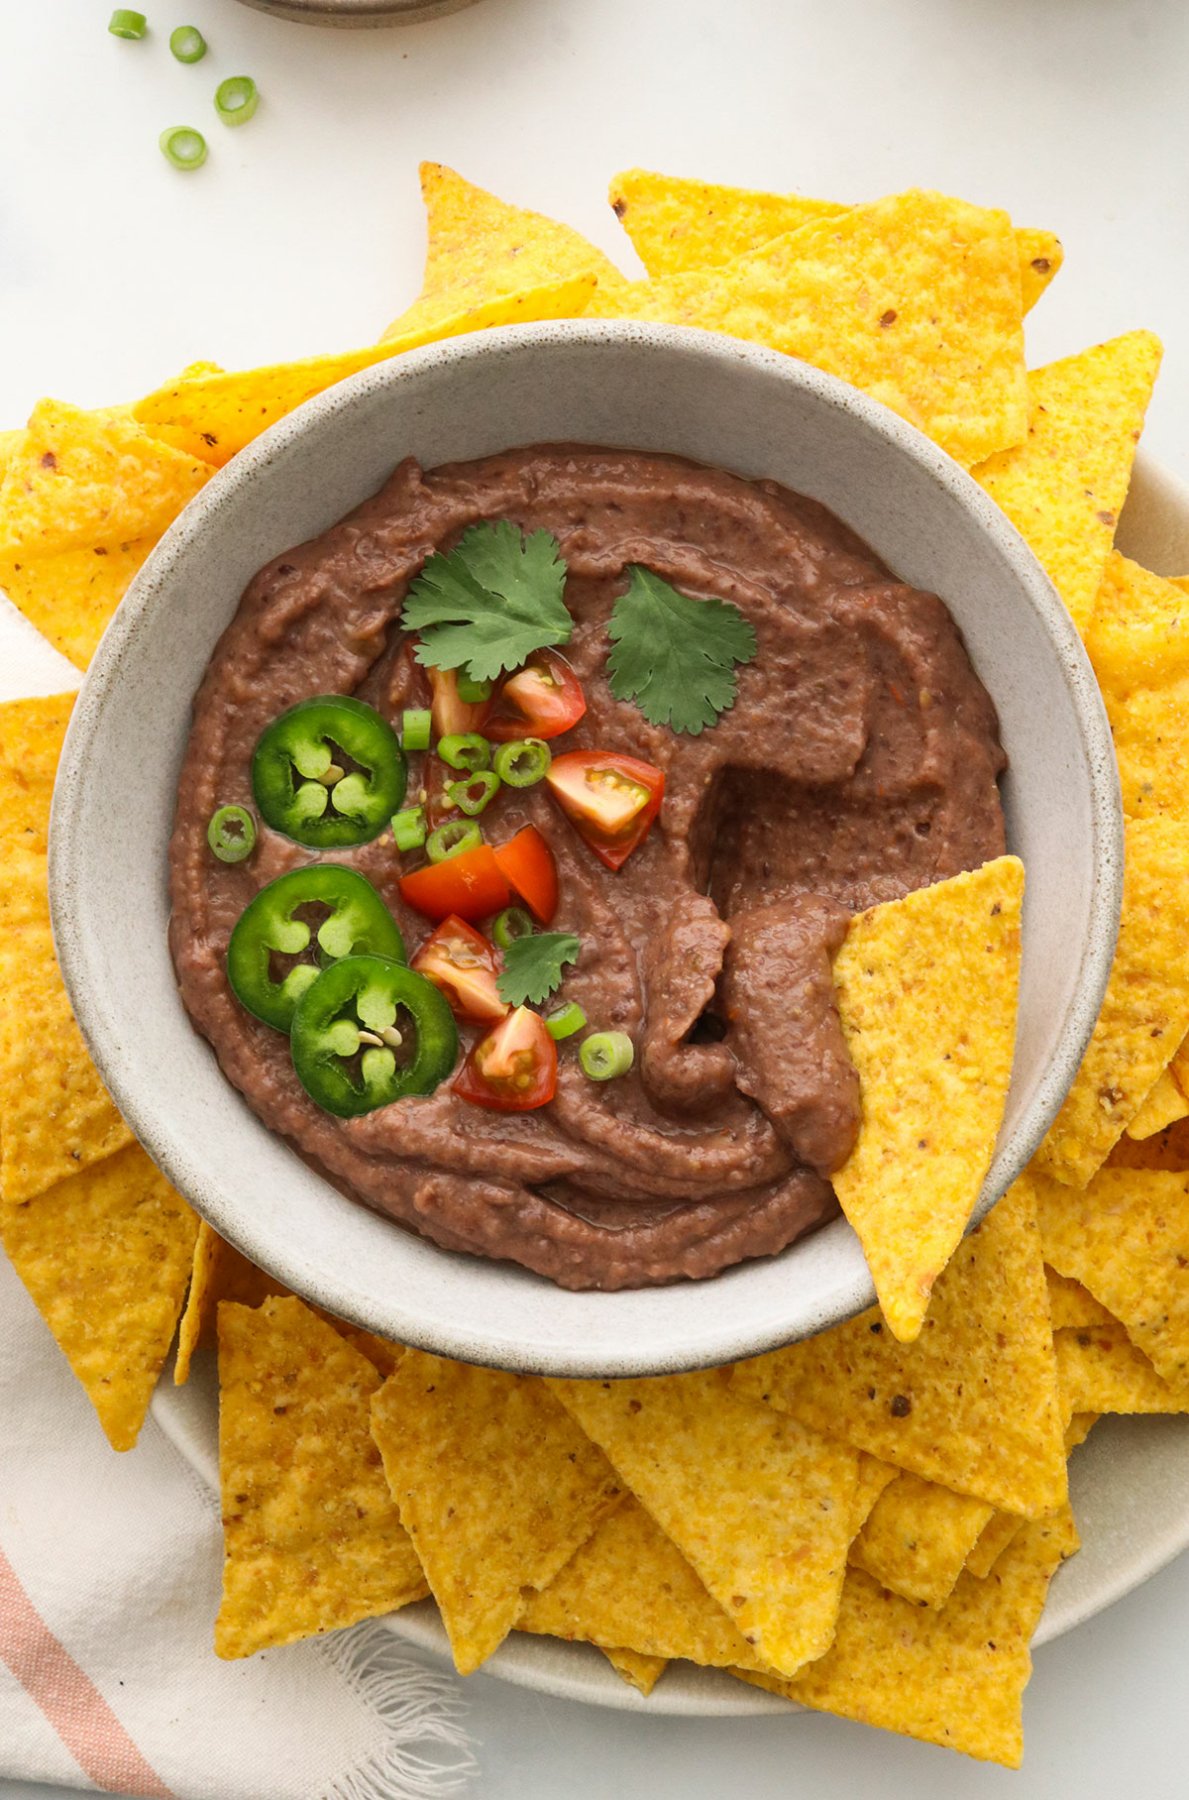 black bean dip topped with tomatoes and cilantro with tortilla chips for dipping.